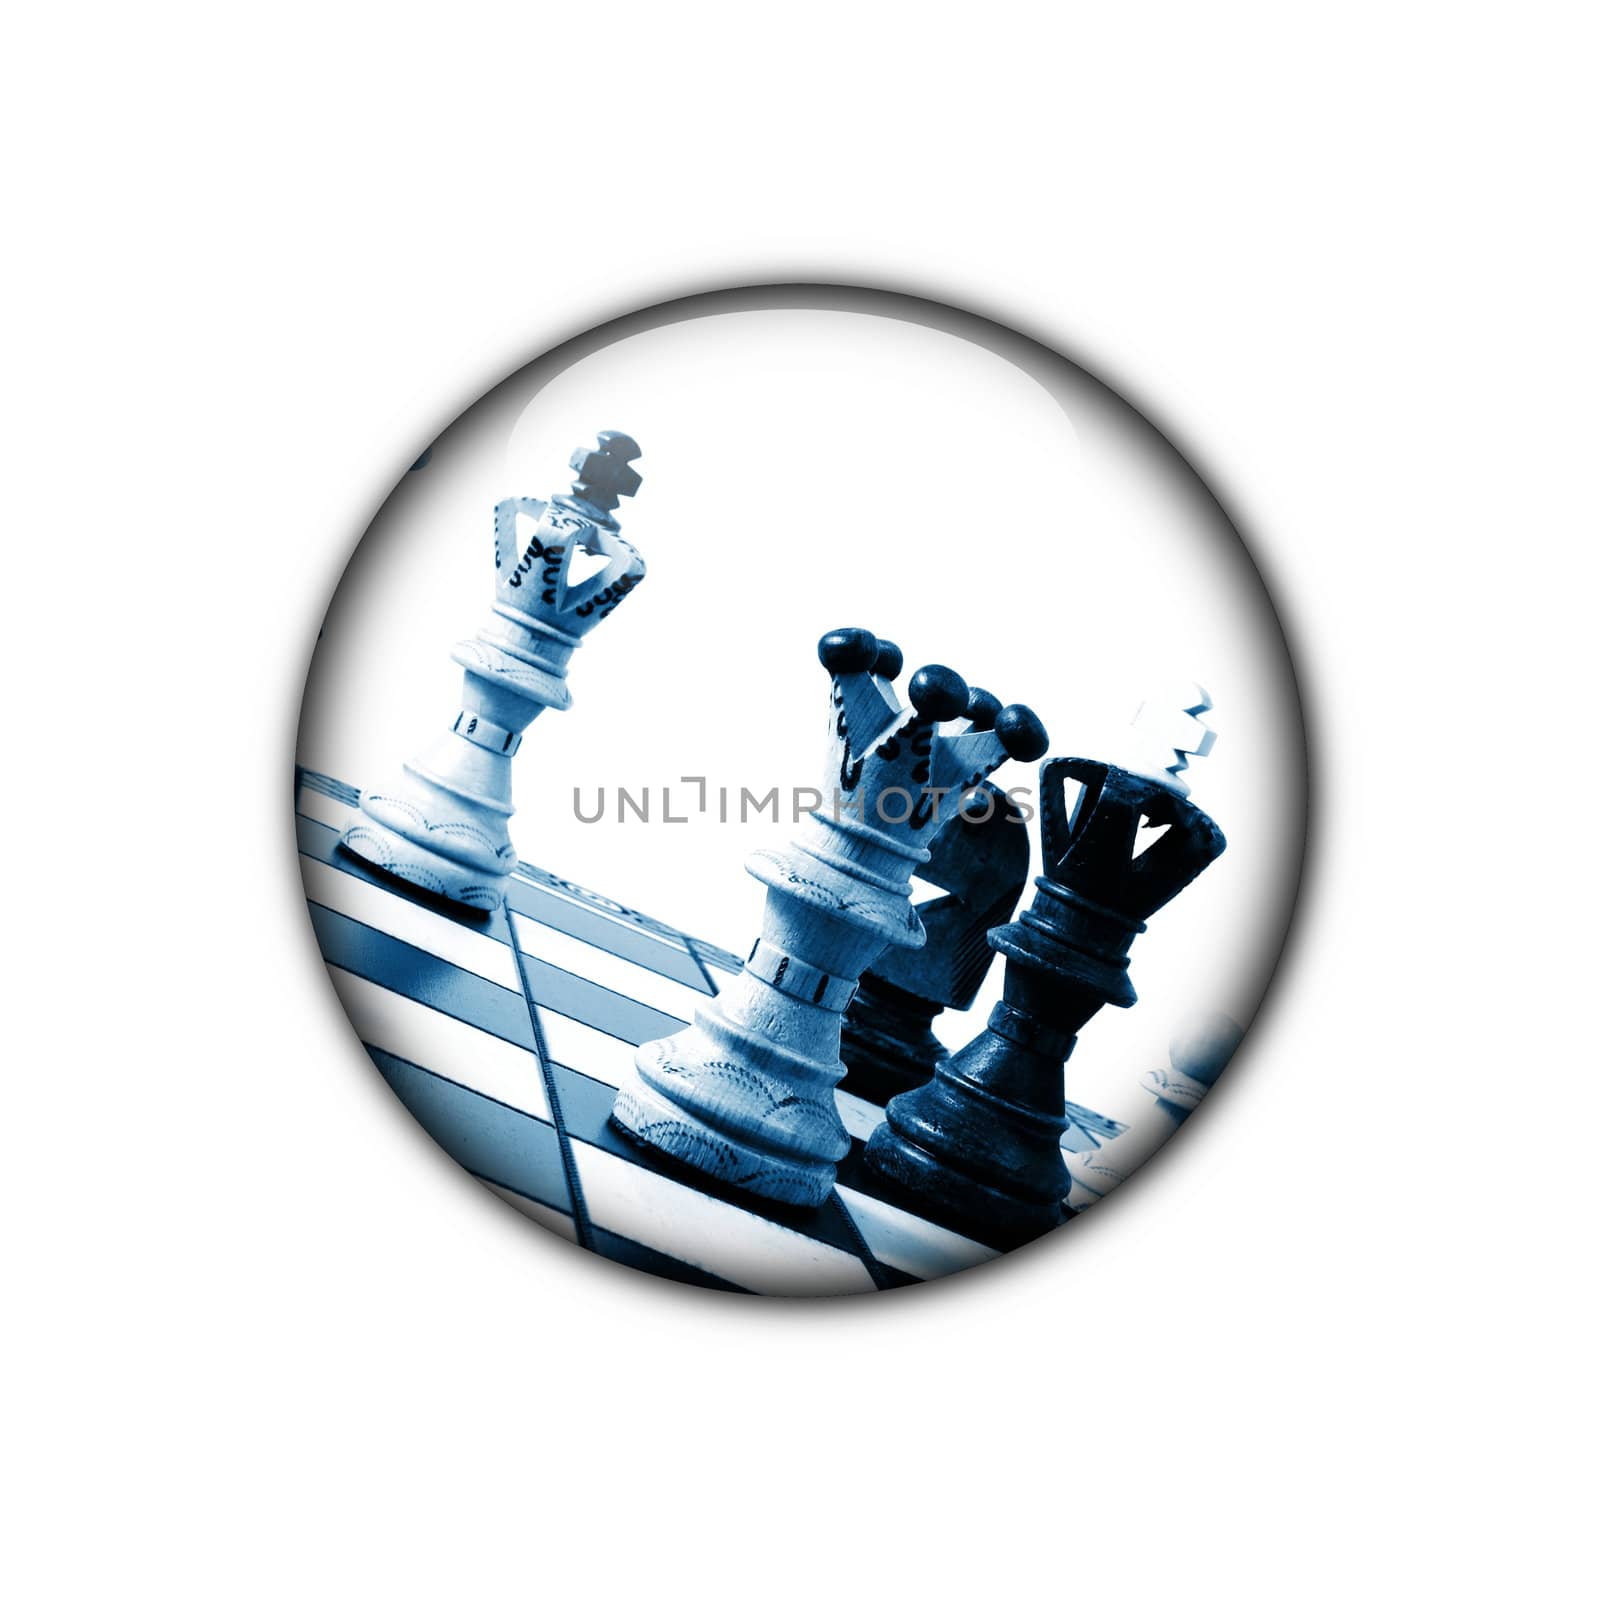 chess button showing business stratregy or competition concept